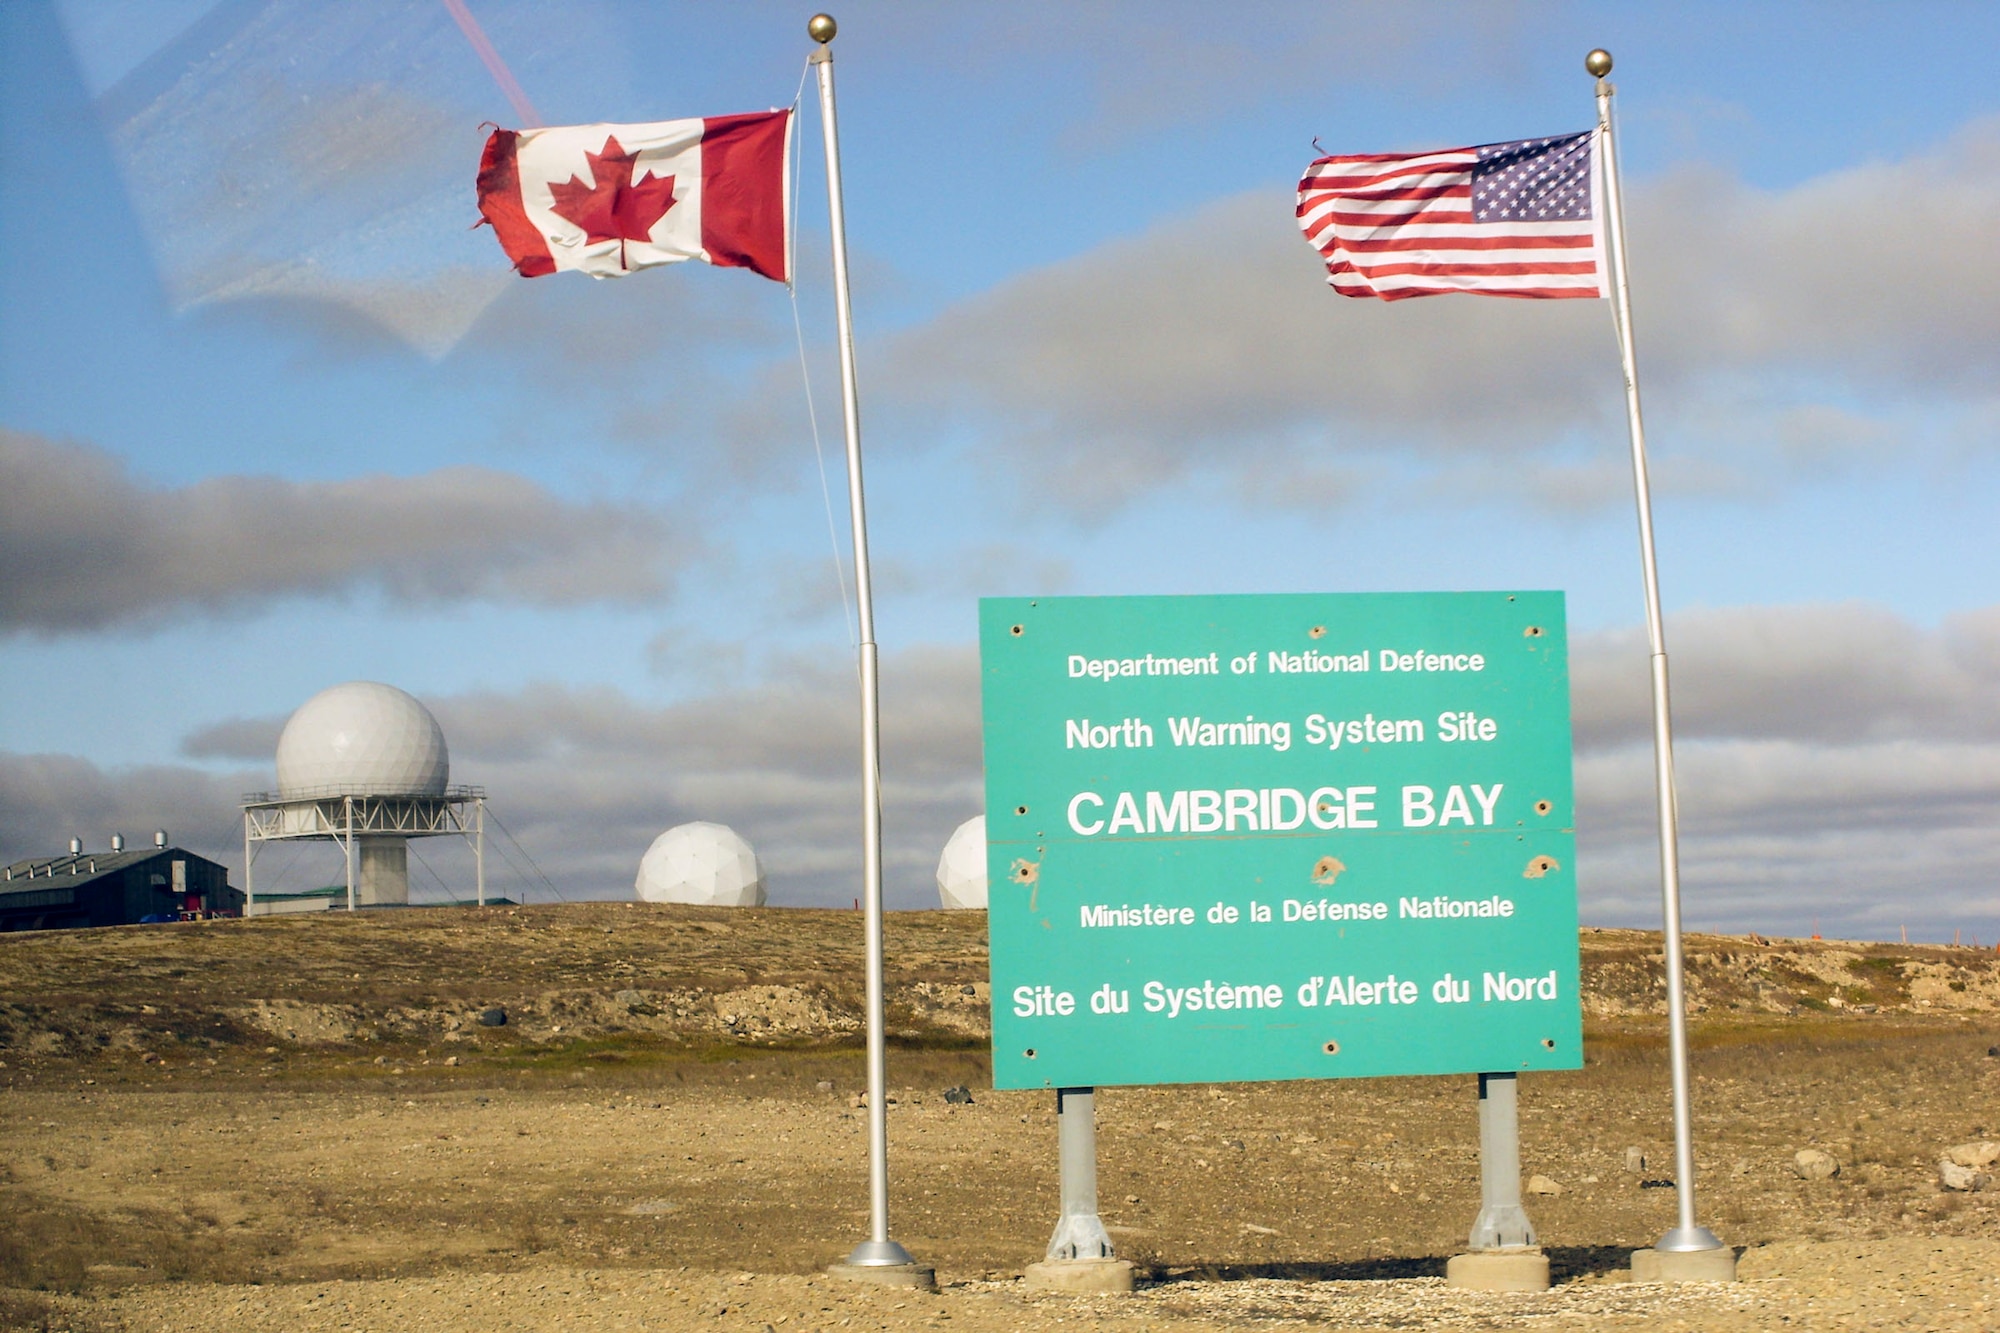 The flags of Canada and the United States fly at the North Warning System Site at Cambridge Bay, Canada. (U.S. Air Force photo/Lanis Williams)